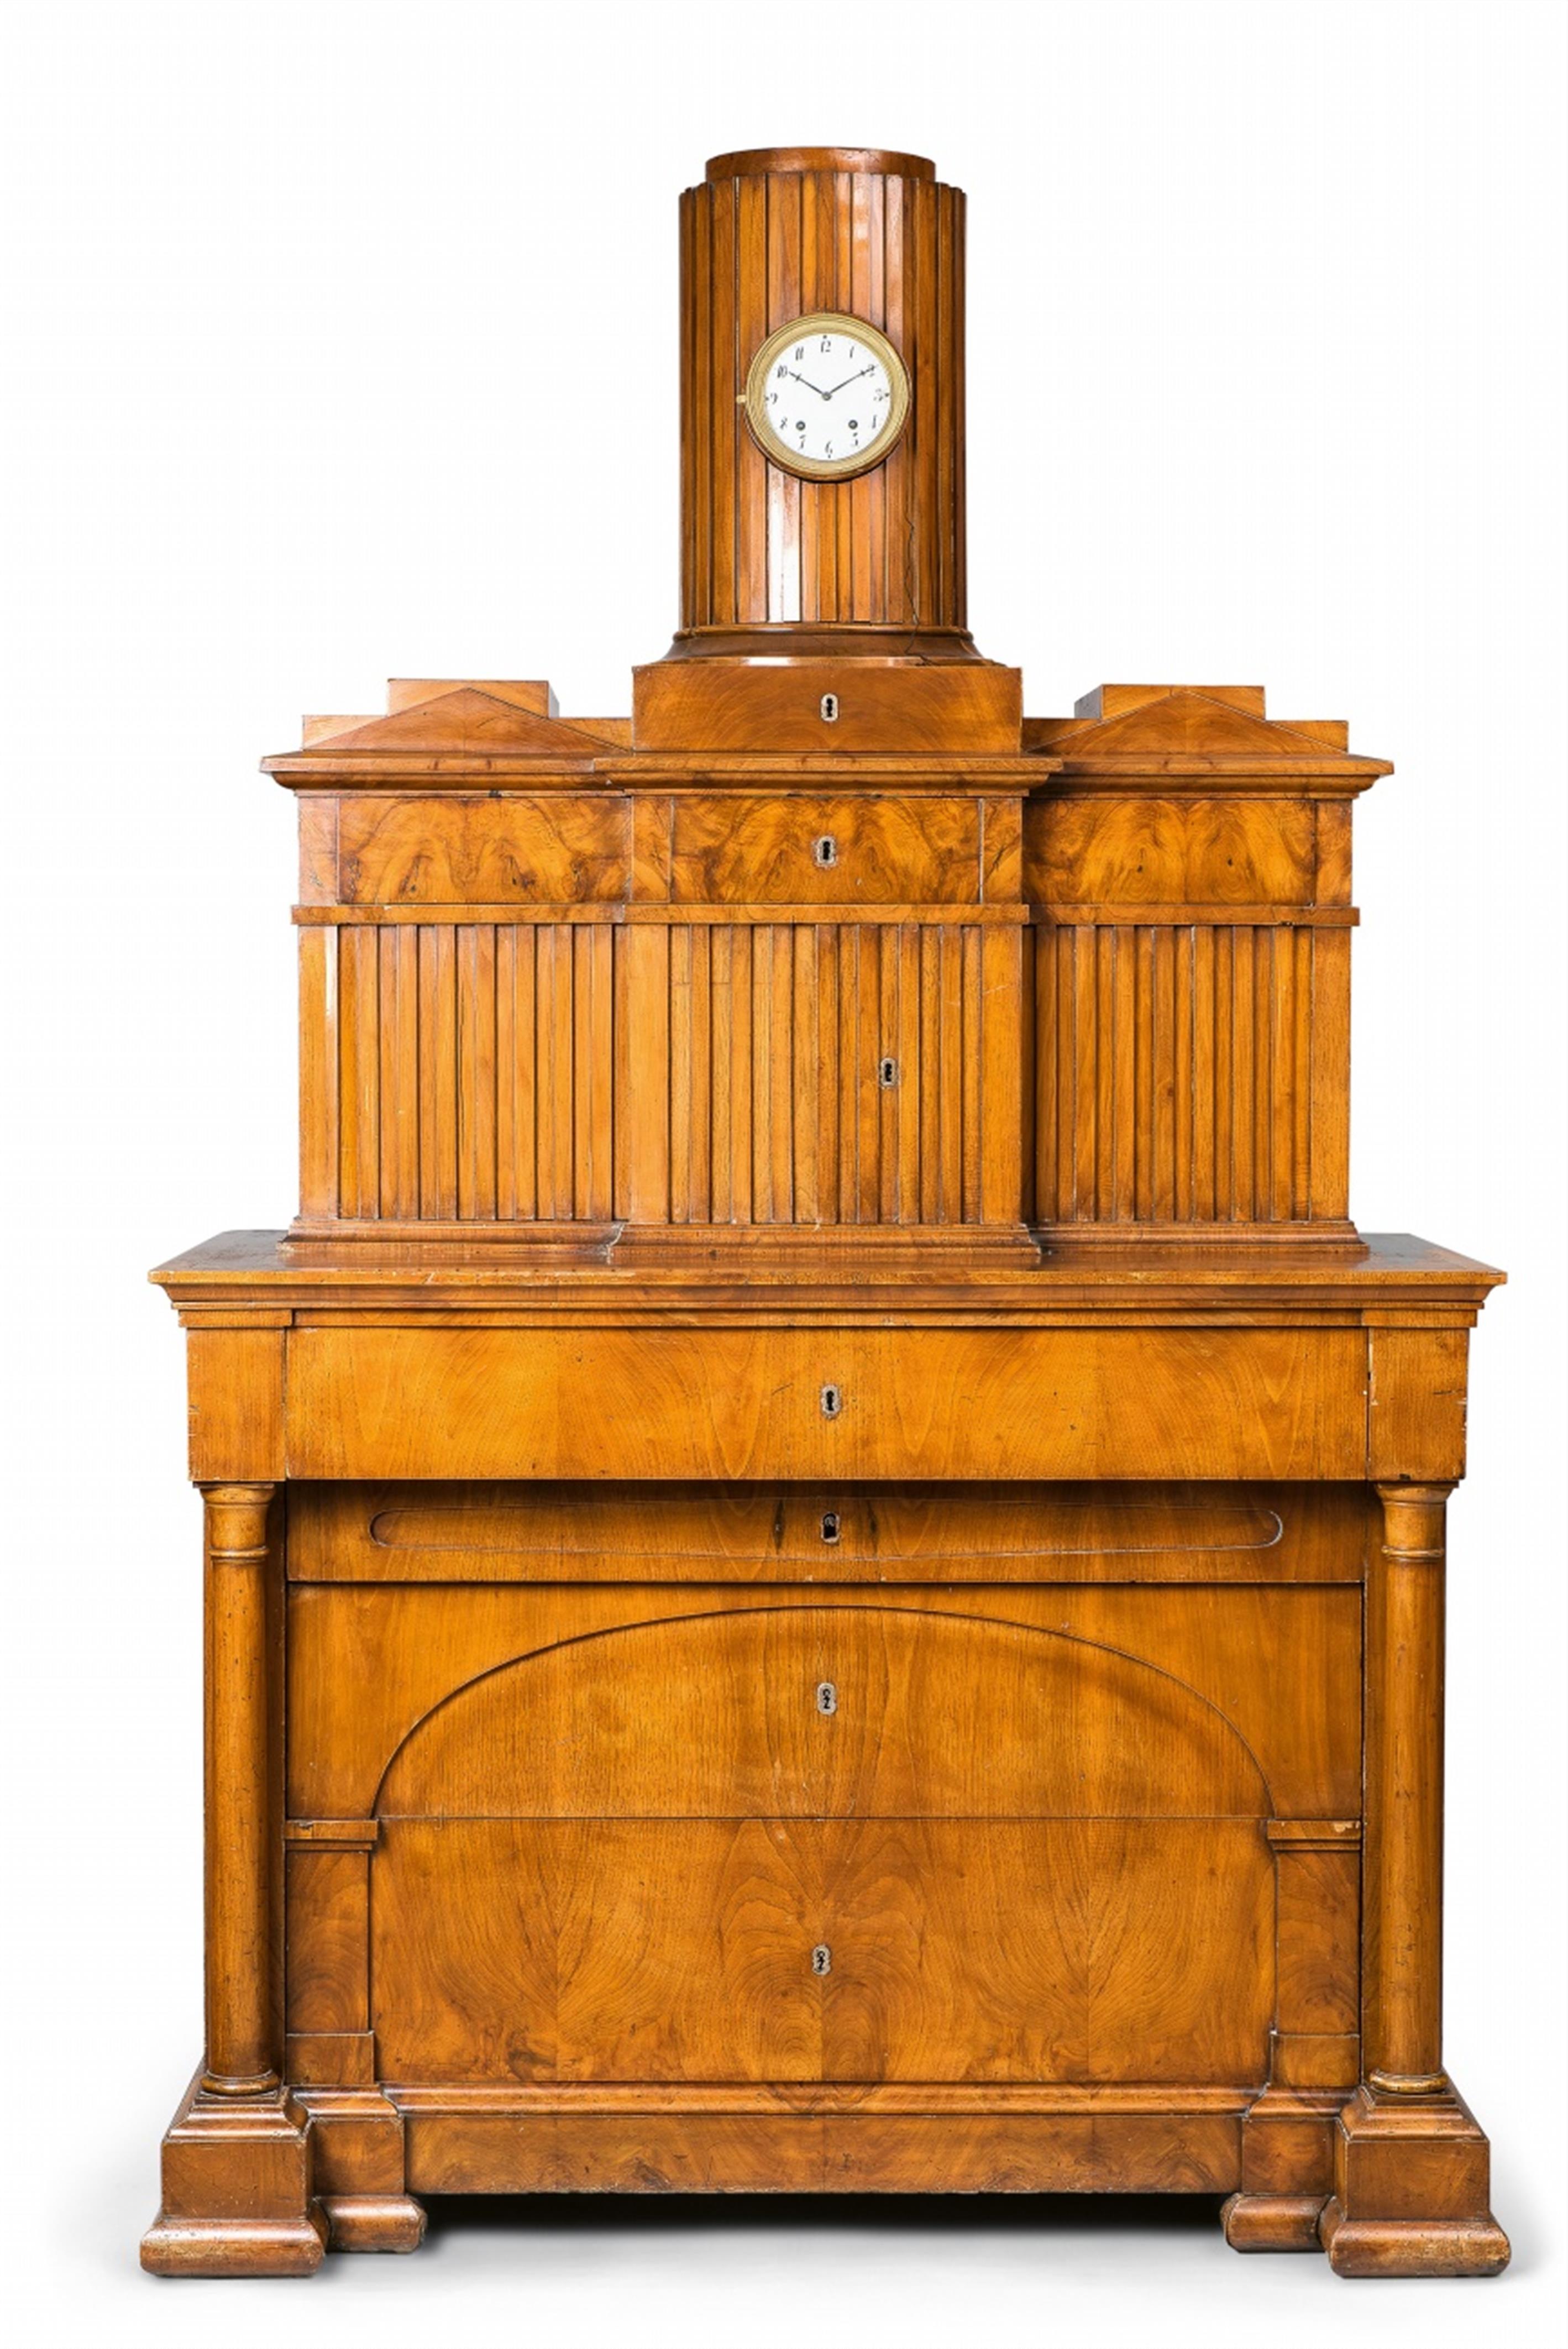 A Bernhard Wanschaff signed Berlin chest of drawers with a clock - image-1